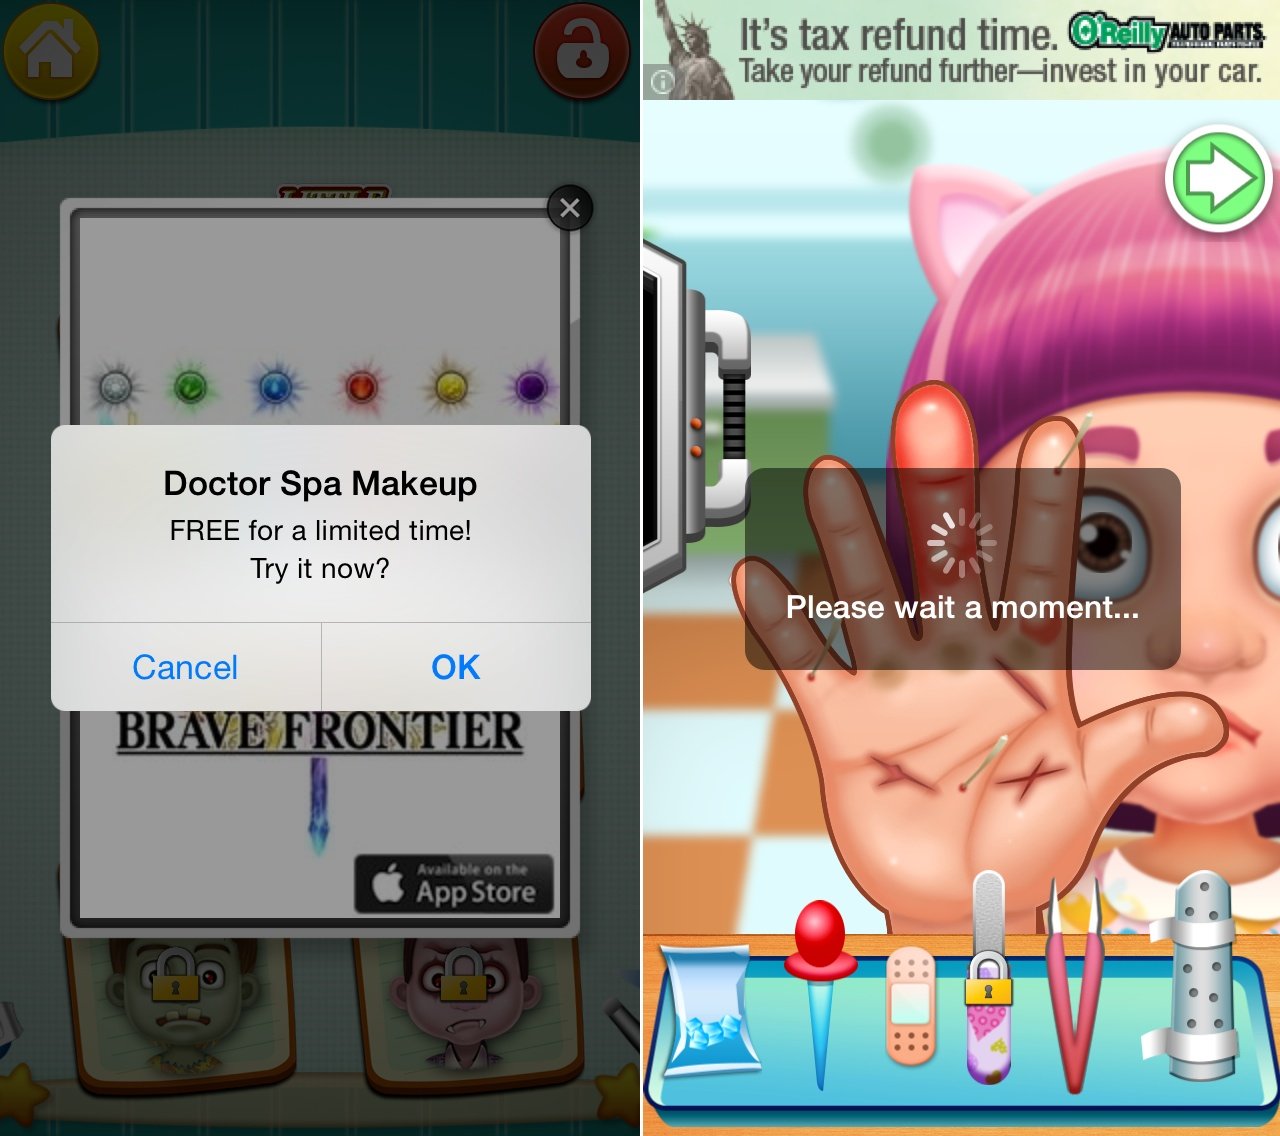 Little Hand Doctor is full of ads an in app purchases.